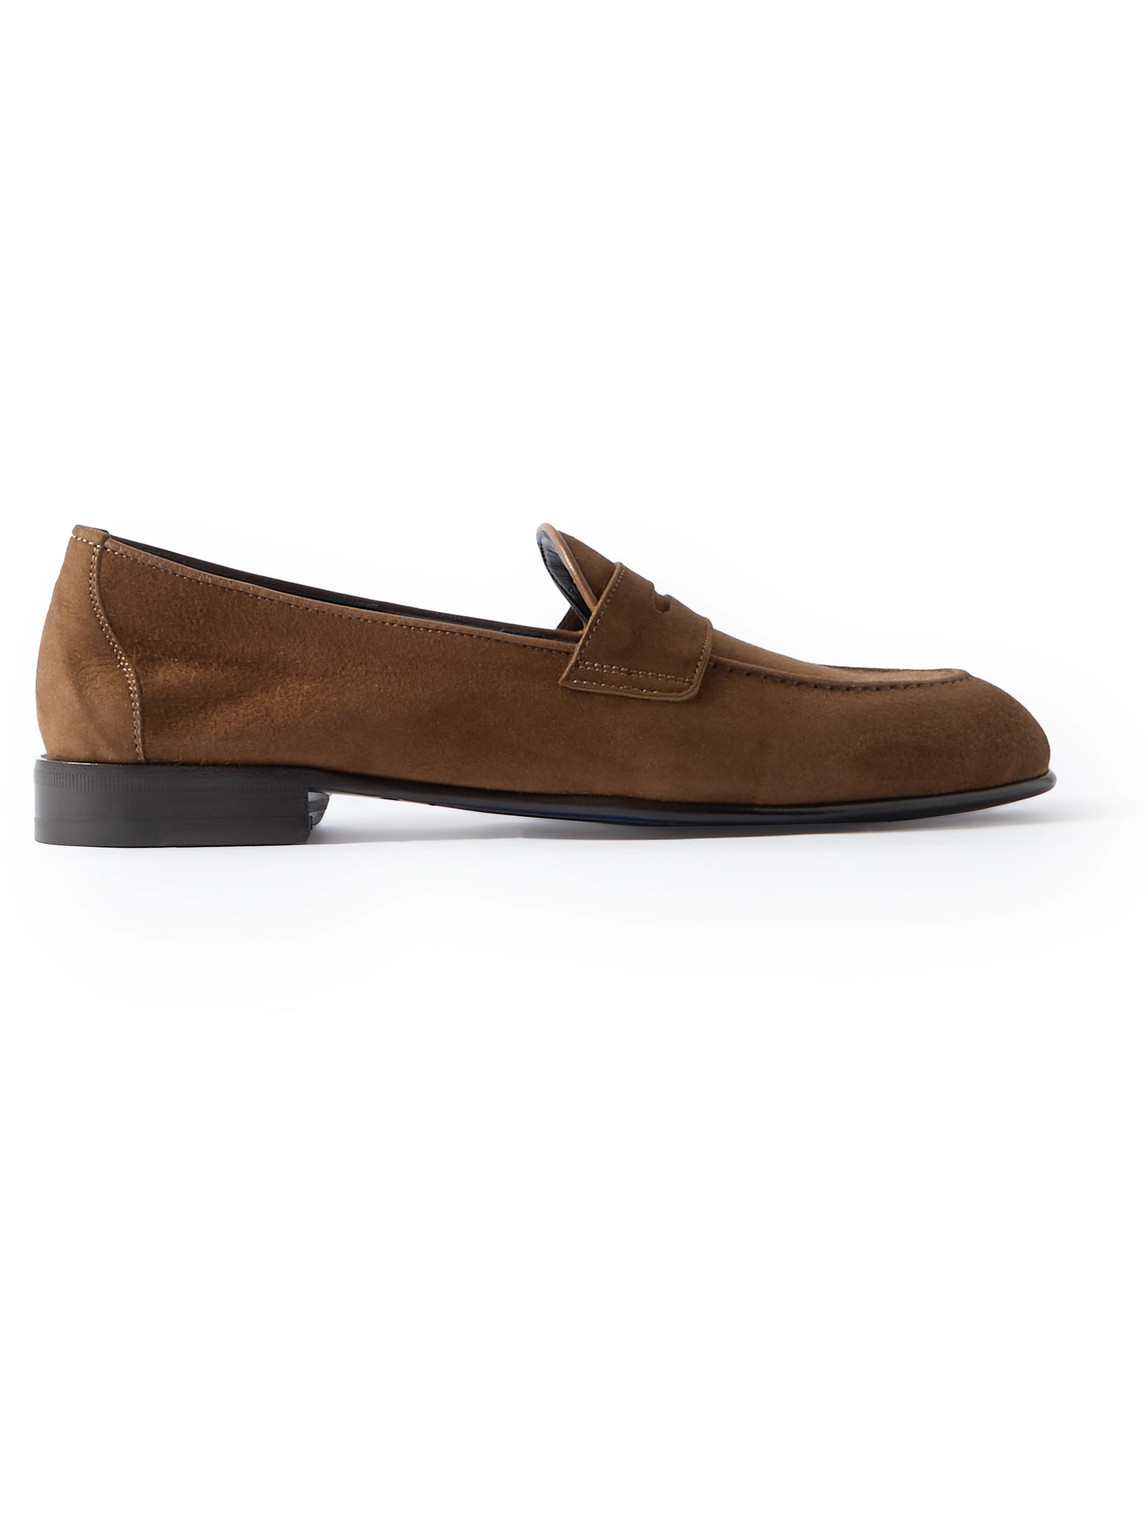 Brioni Suede Penny Loafers In Brown